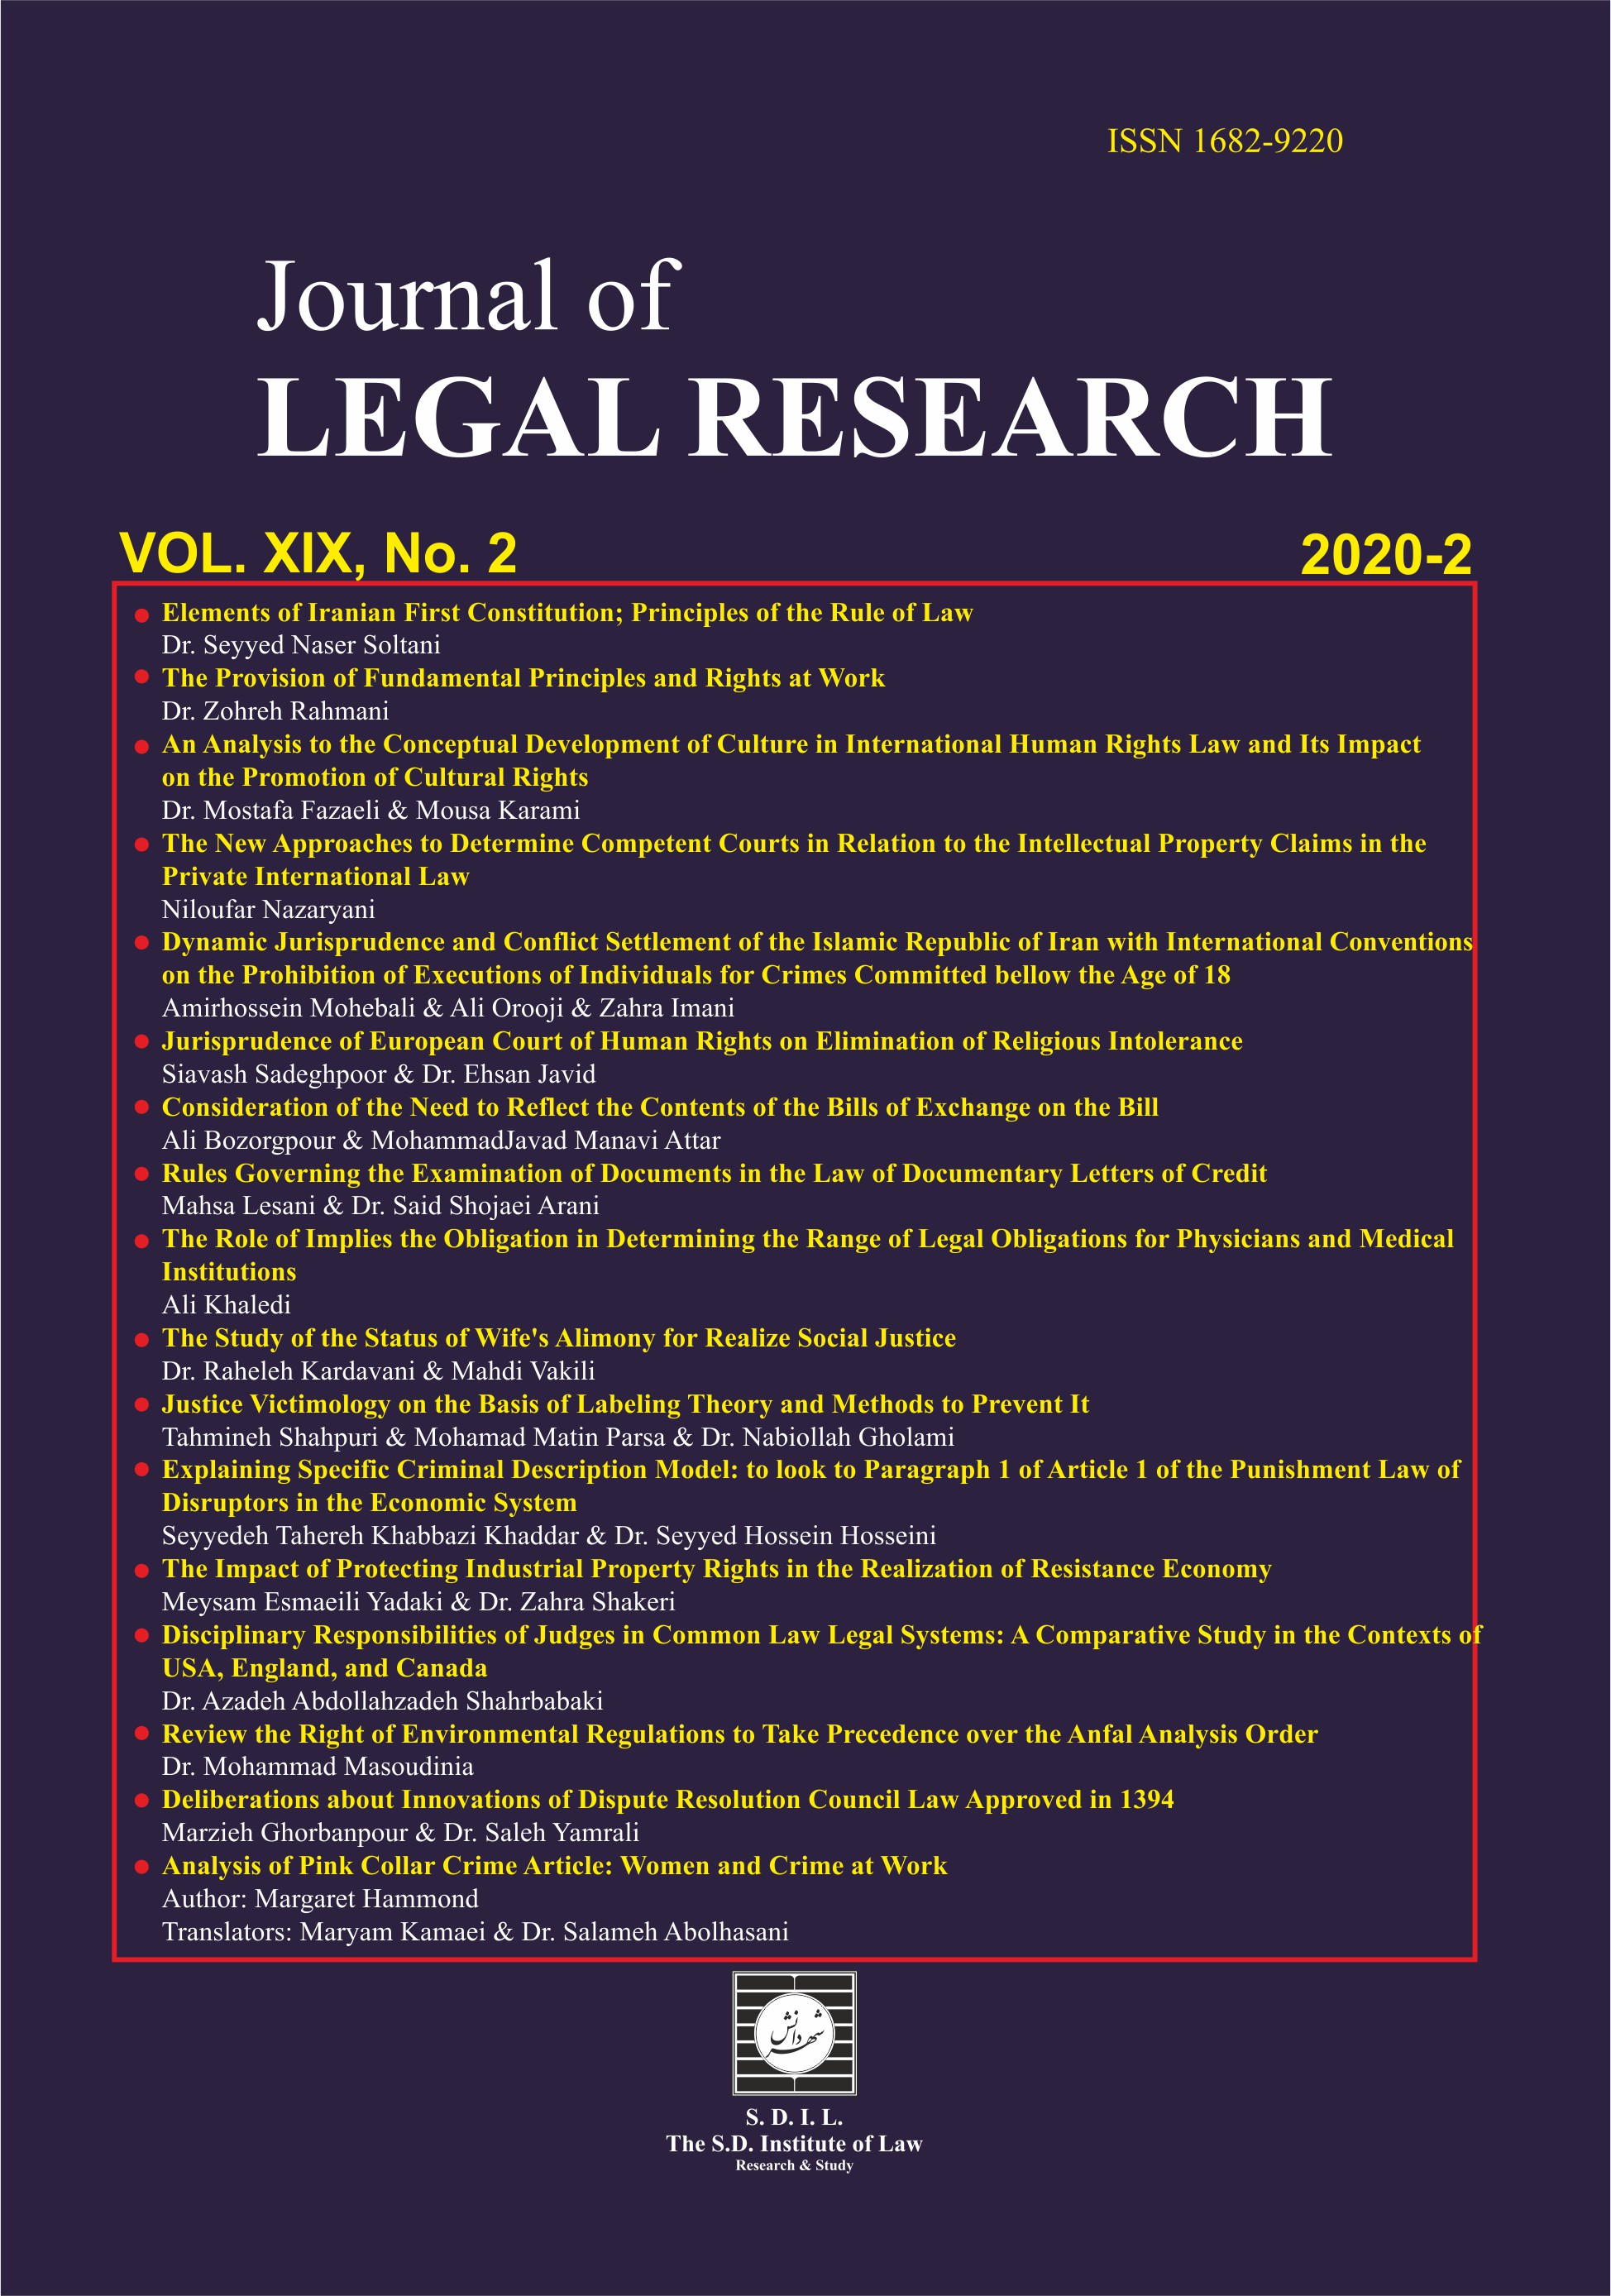 Journal of Legal Research